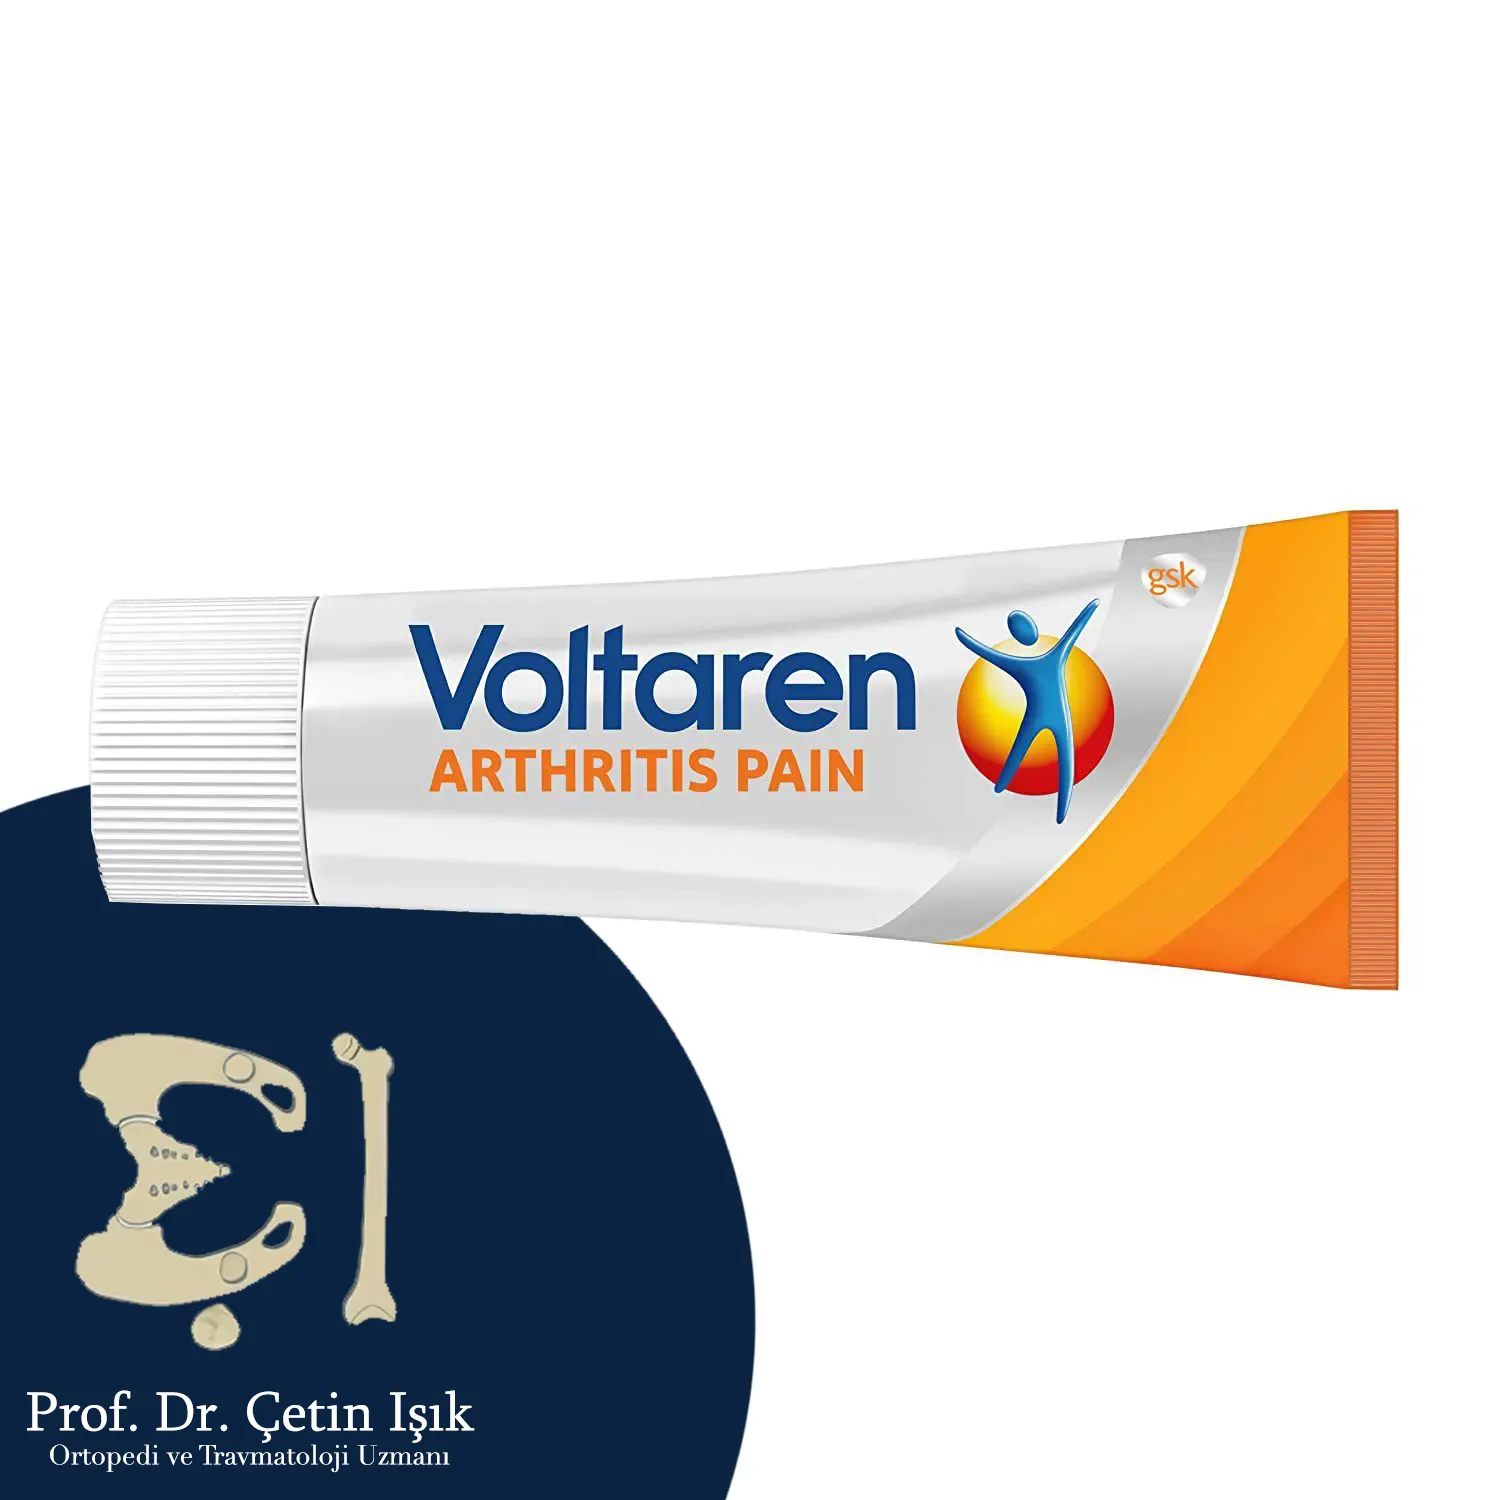 Voltaren cream is widely known in the treatment of joint pain and stiffness because it contains diclofenac in its composition